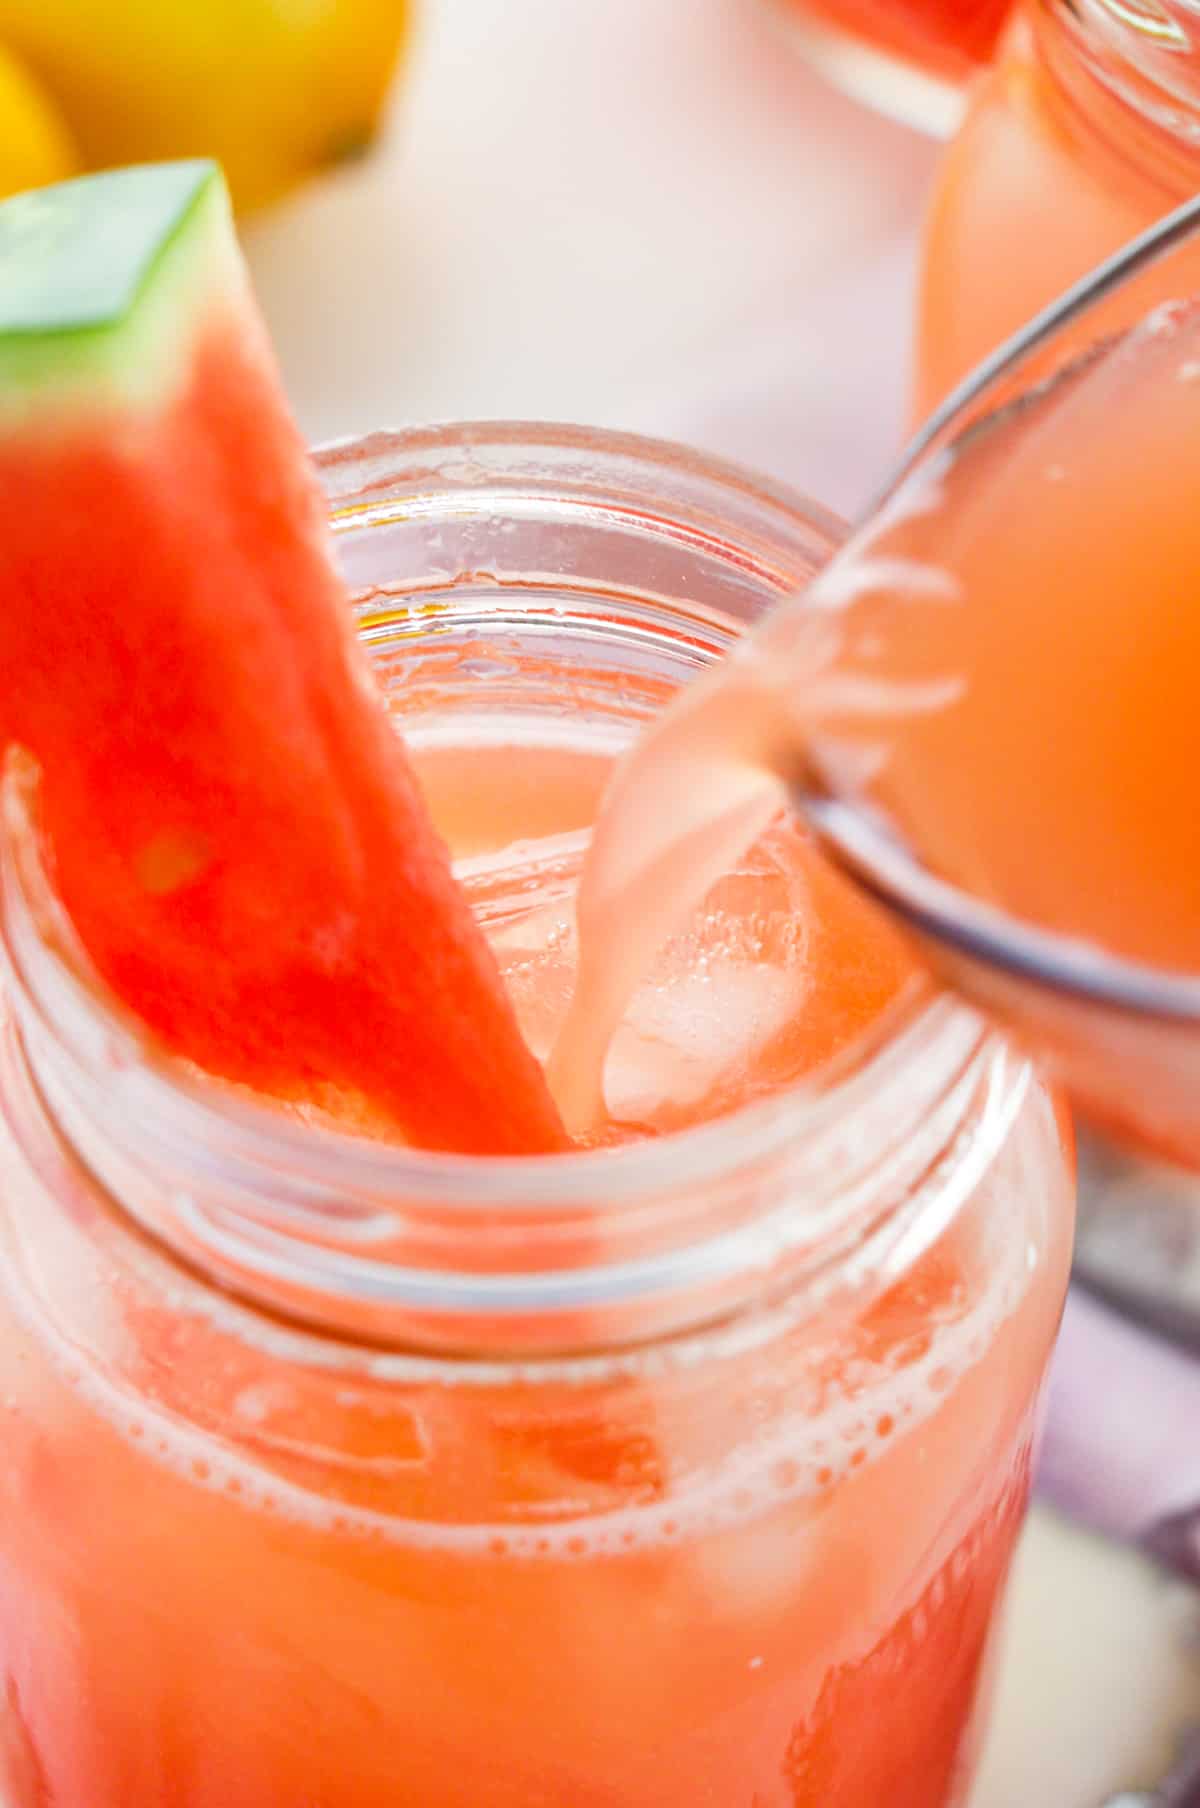 Watermelon lemonade being poured from pitcher into glass garnished with fresh watermelon